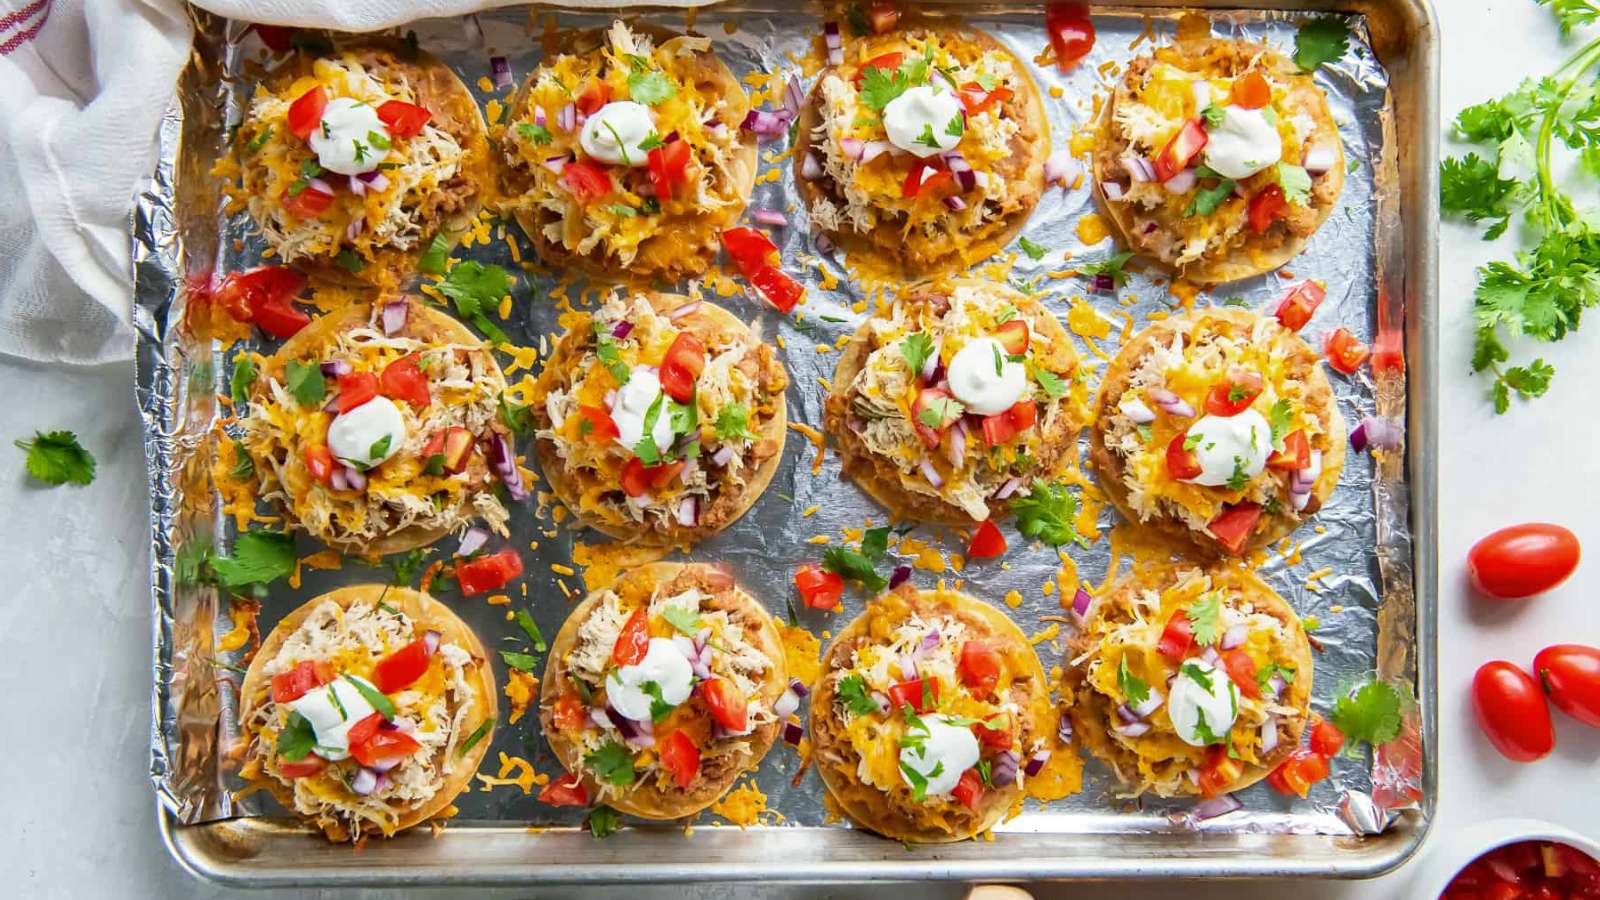 Tostadas on a baking sheet with tomatoes and sour cream.